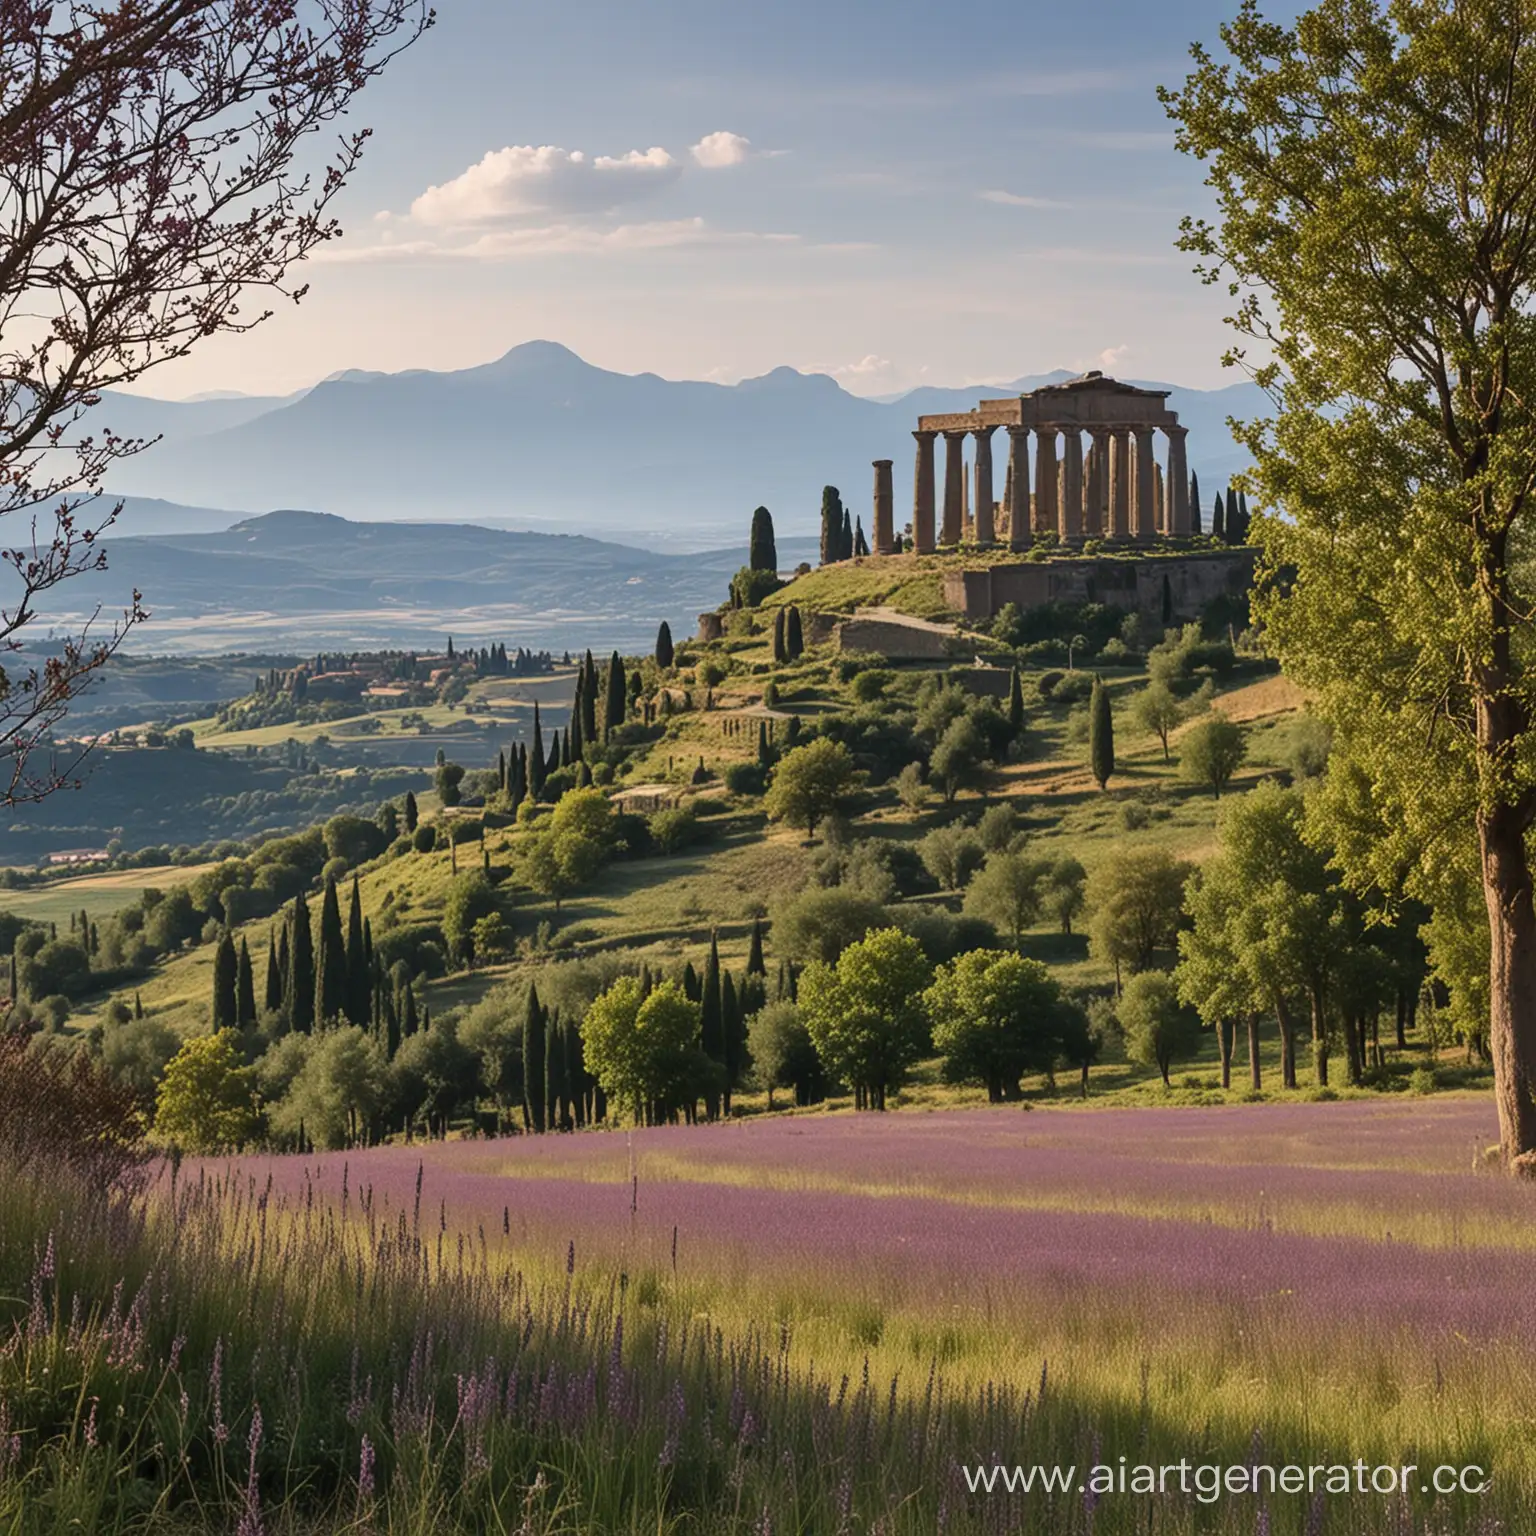 An obscure pagan temple in the Violet Land of the Winkies, Orvieto, distant huge mountains in the background, colossal, rural